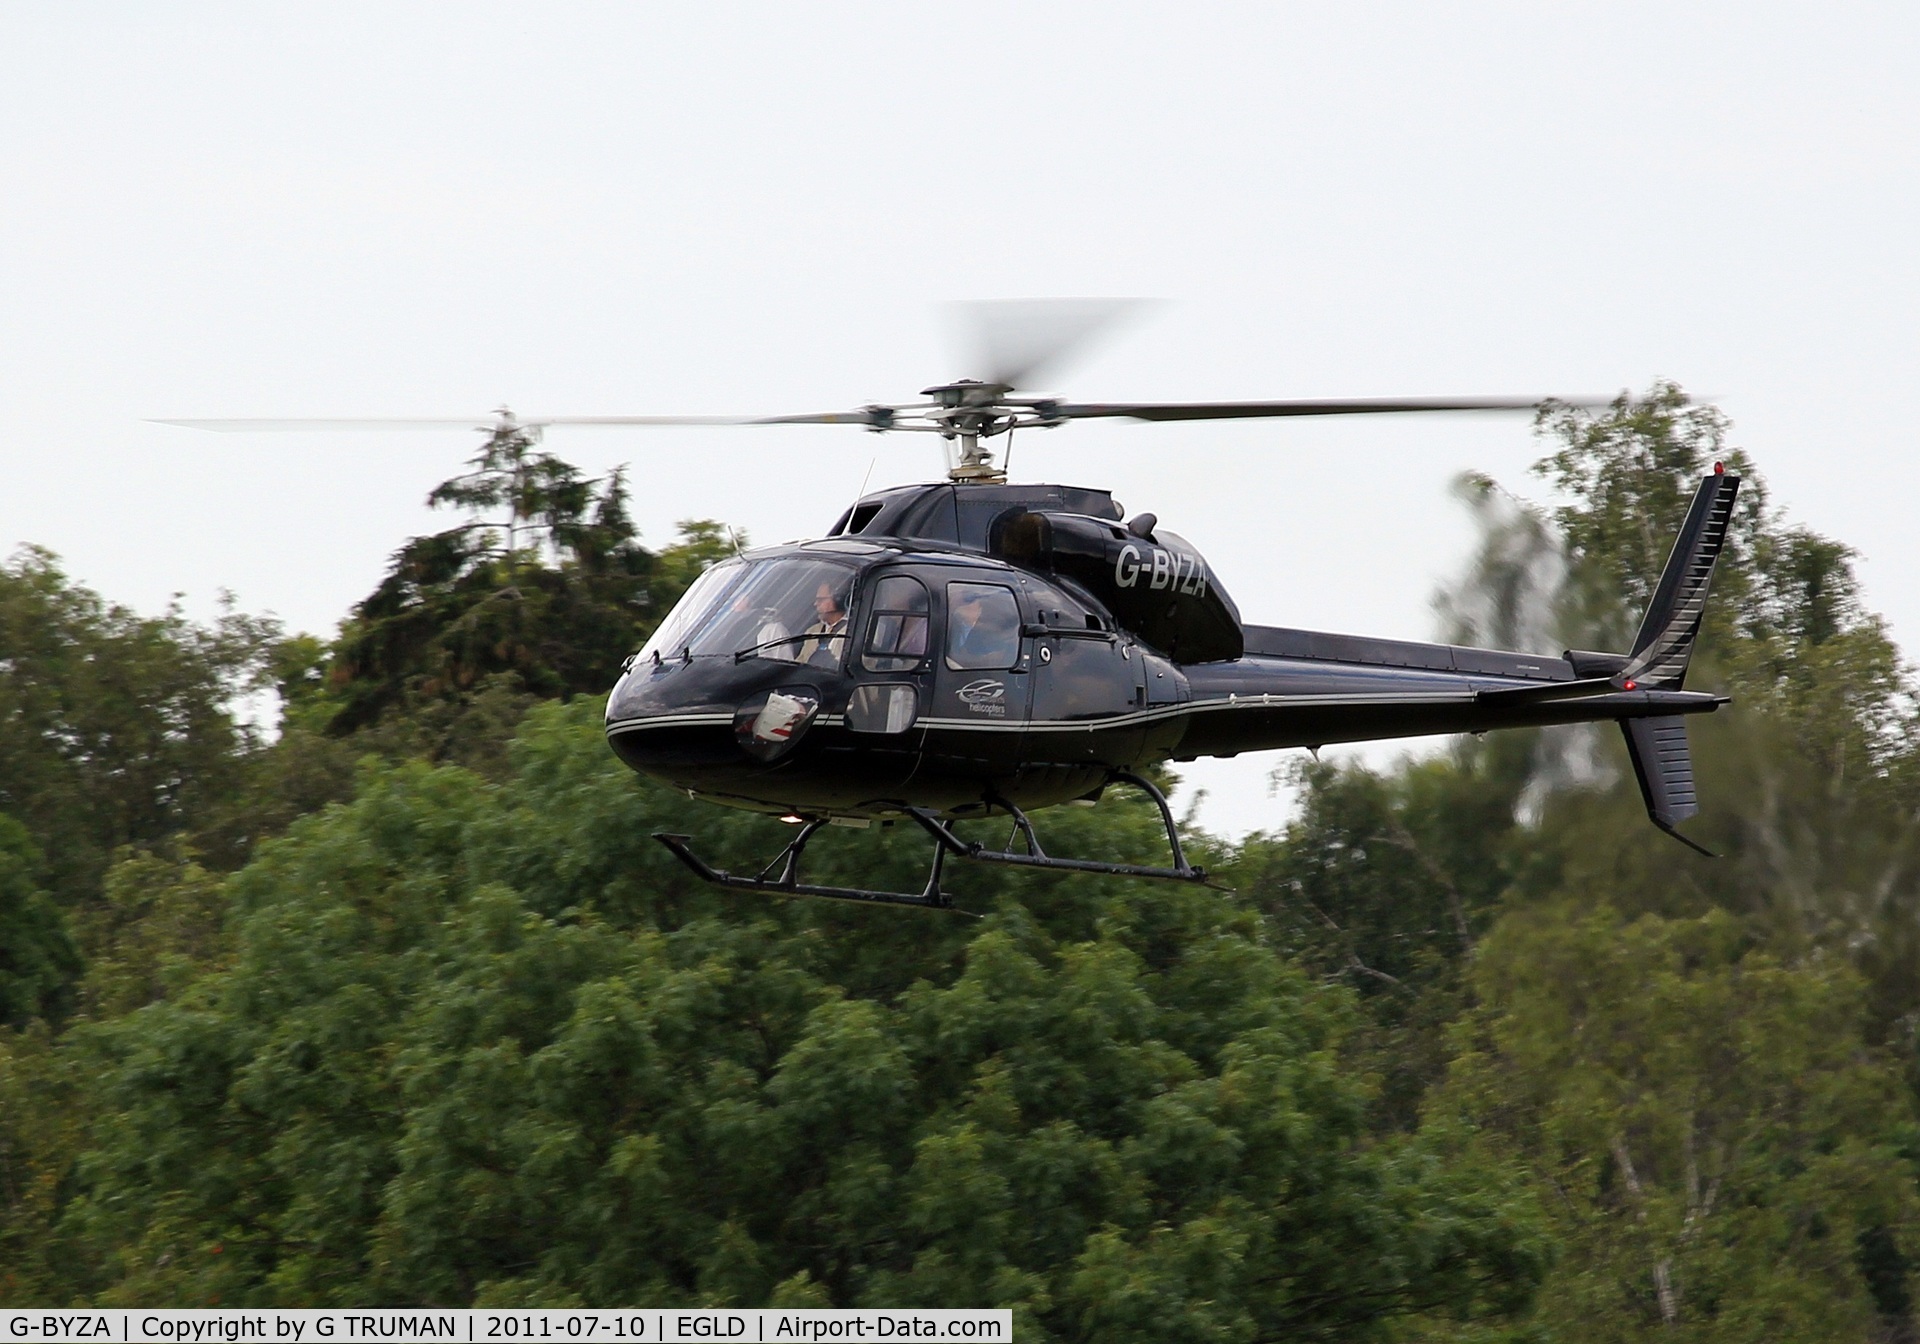 G-BYZA, 1992 Aerospatiale AS-355F-2 Ecureuil 2 C/N 5518, Inbound from Silverstone after the 2011 British GP